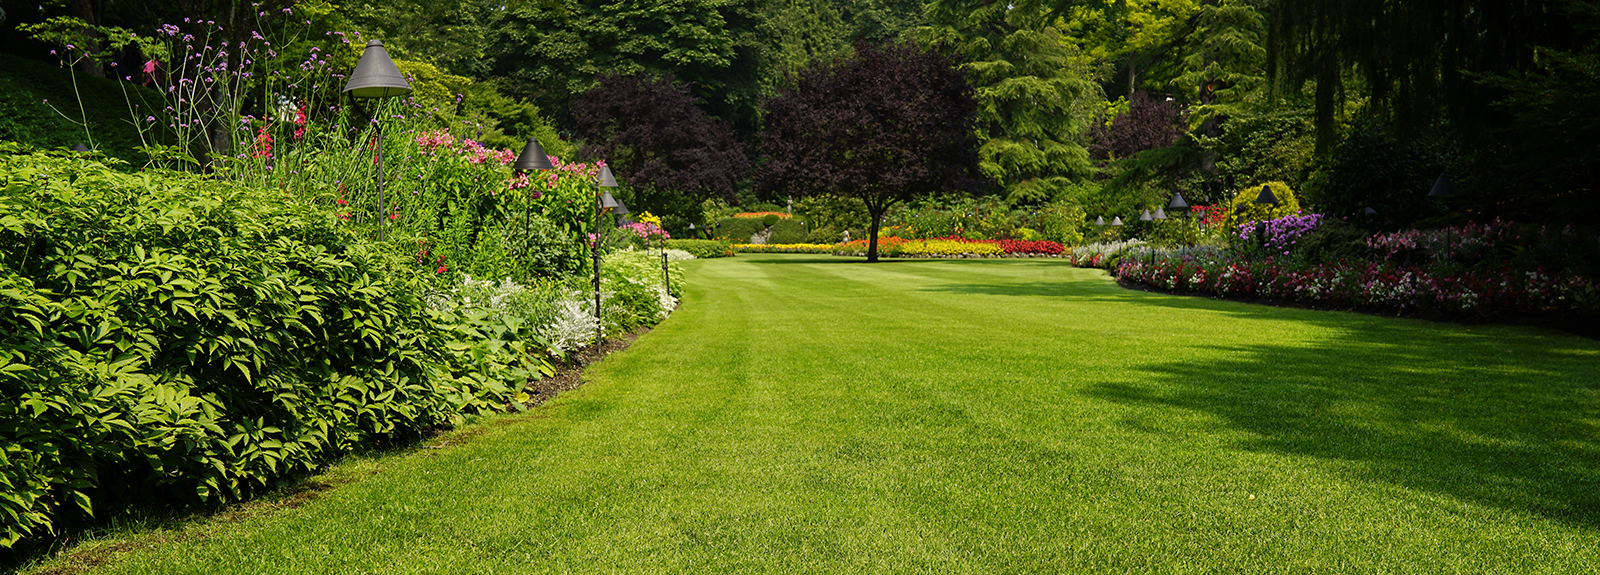 6-Awesome-Facts-About-Lawns